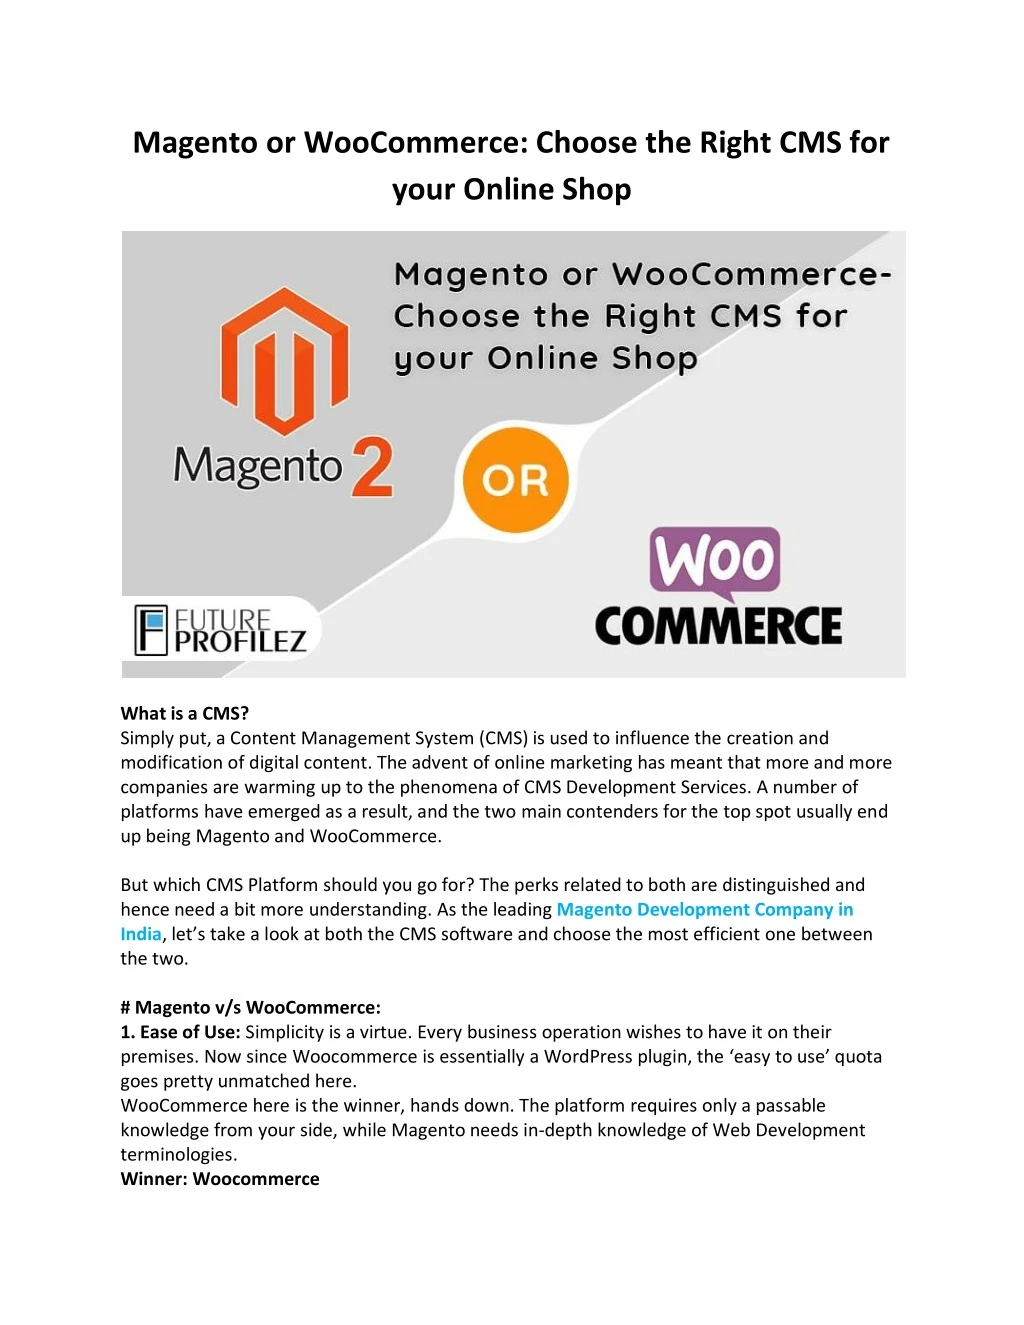 magento or woocommerce choose the right